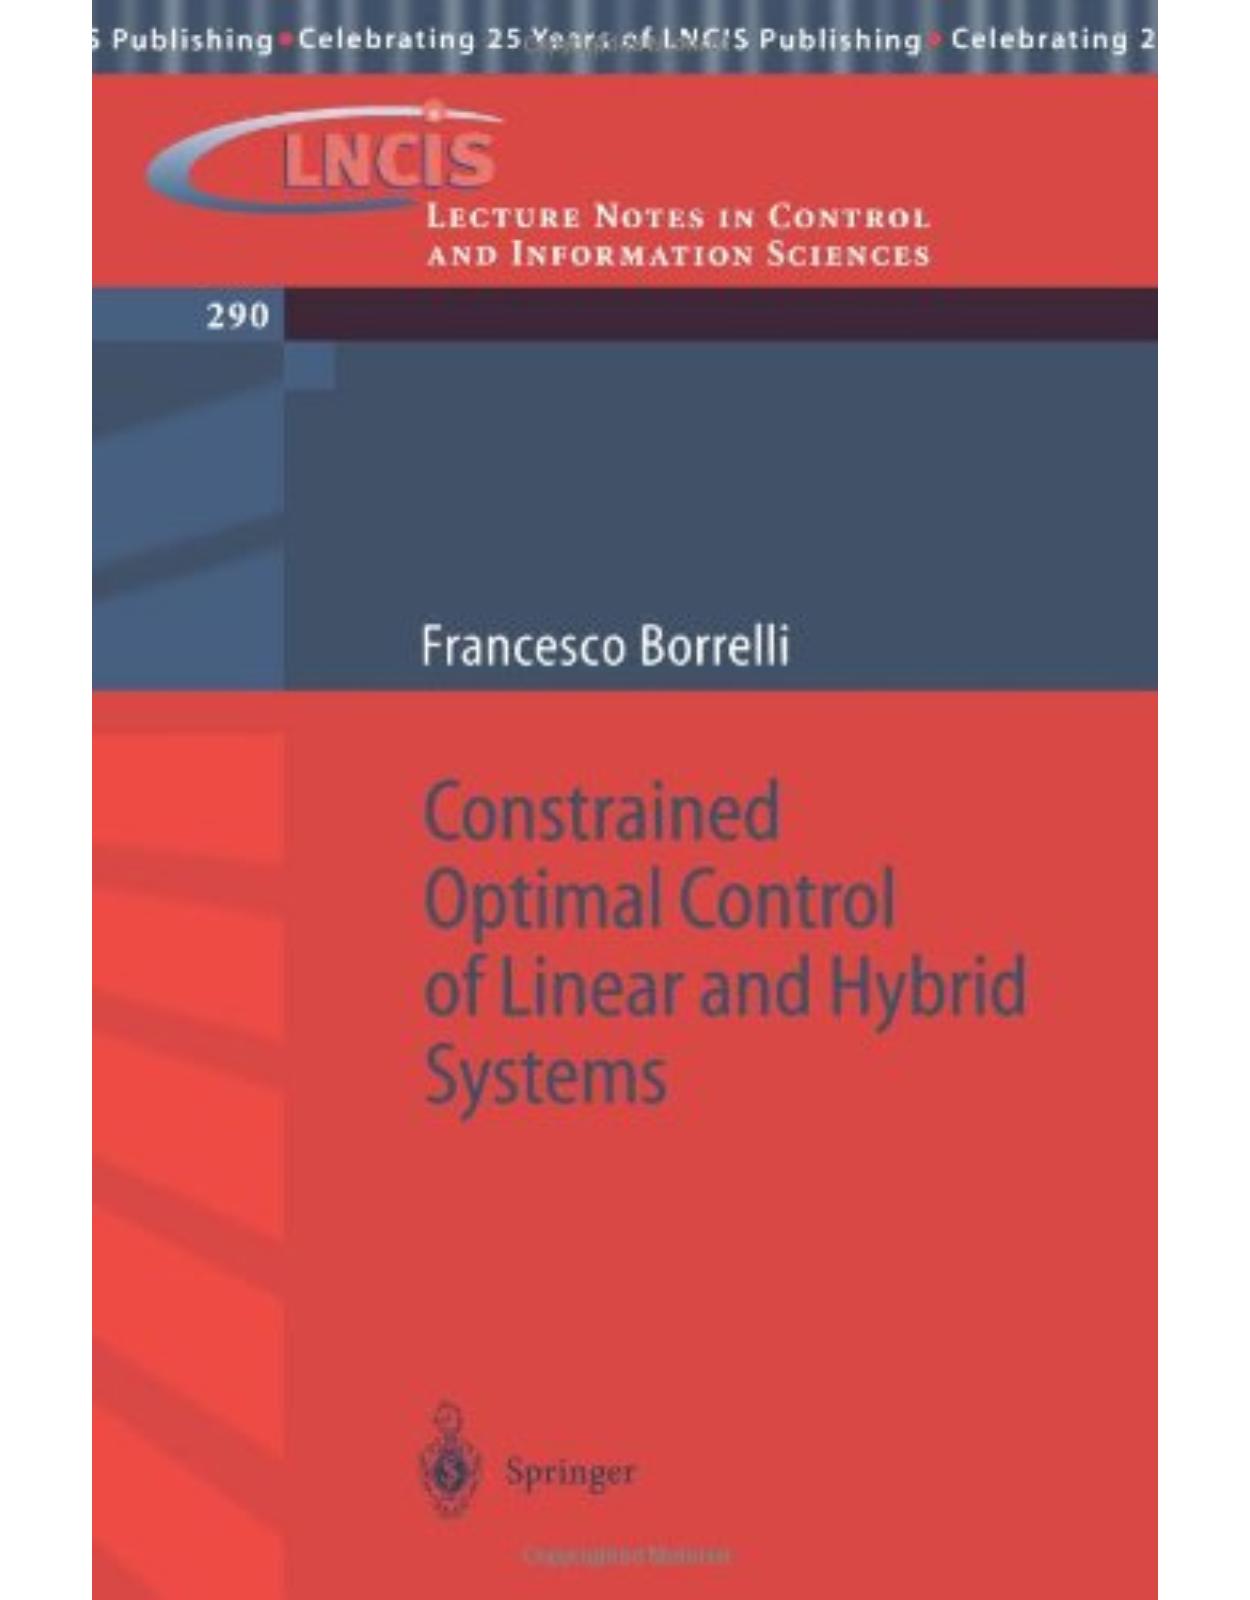 Constrained Optimal Control of Linear and Hybrid Systems (Lecture Notes in Control and Information Sciences)